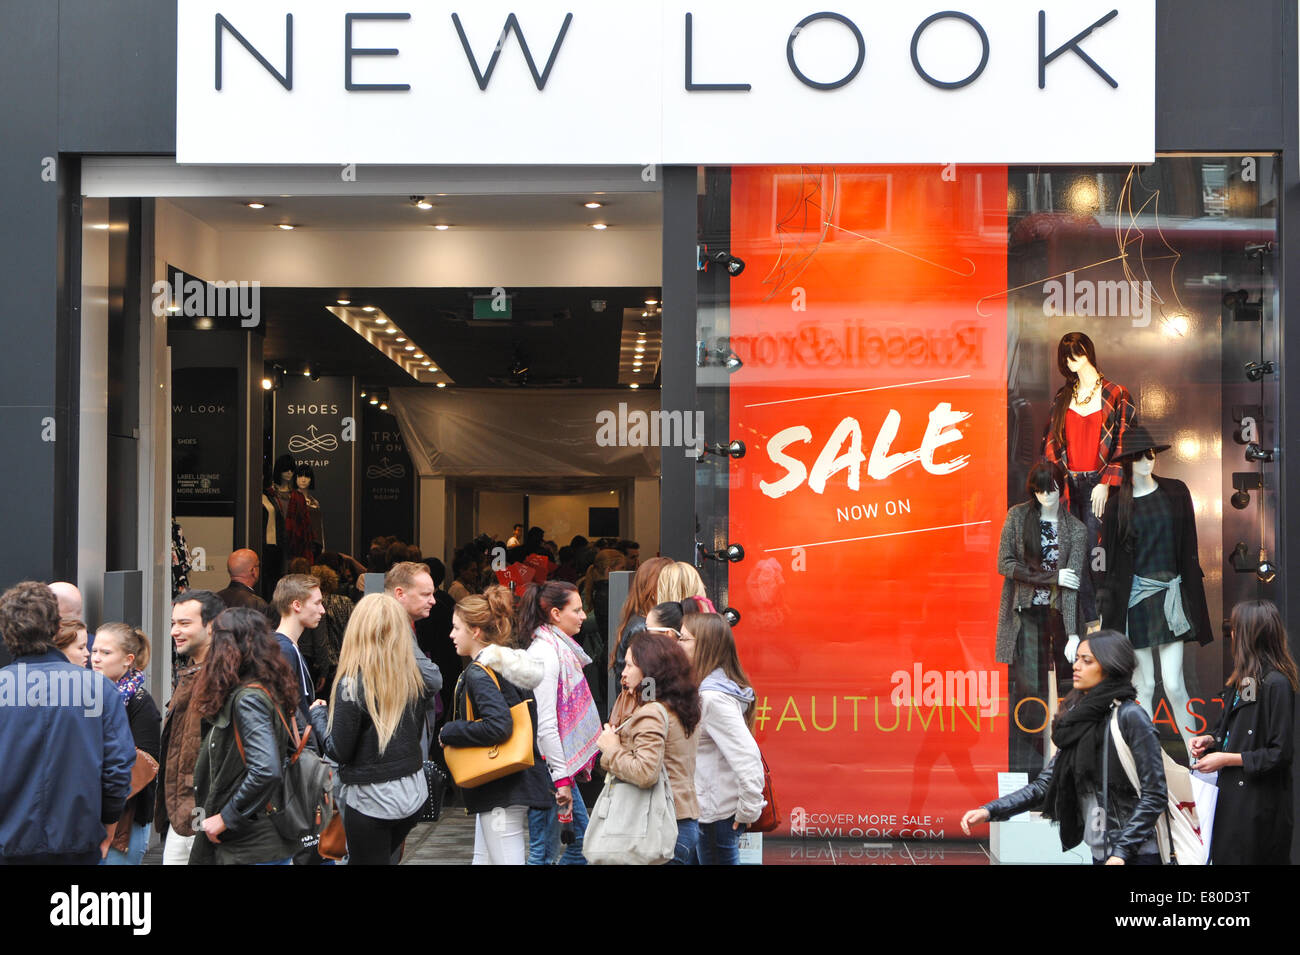 Oxford Street, London, UK. 27th September 2014. Stores have their new Autumn season clothes on sale due the recent warm weather which has affected sales. Stock Photo